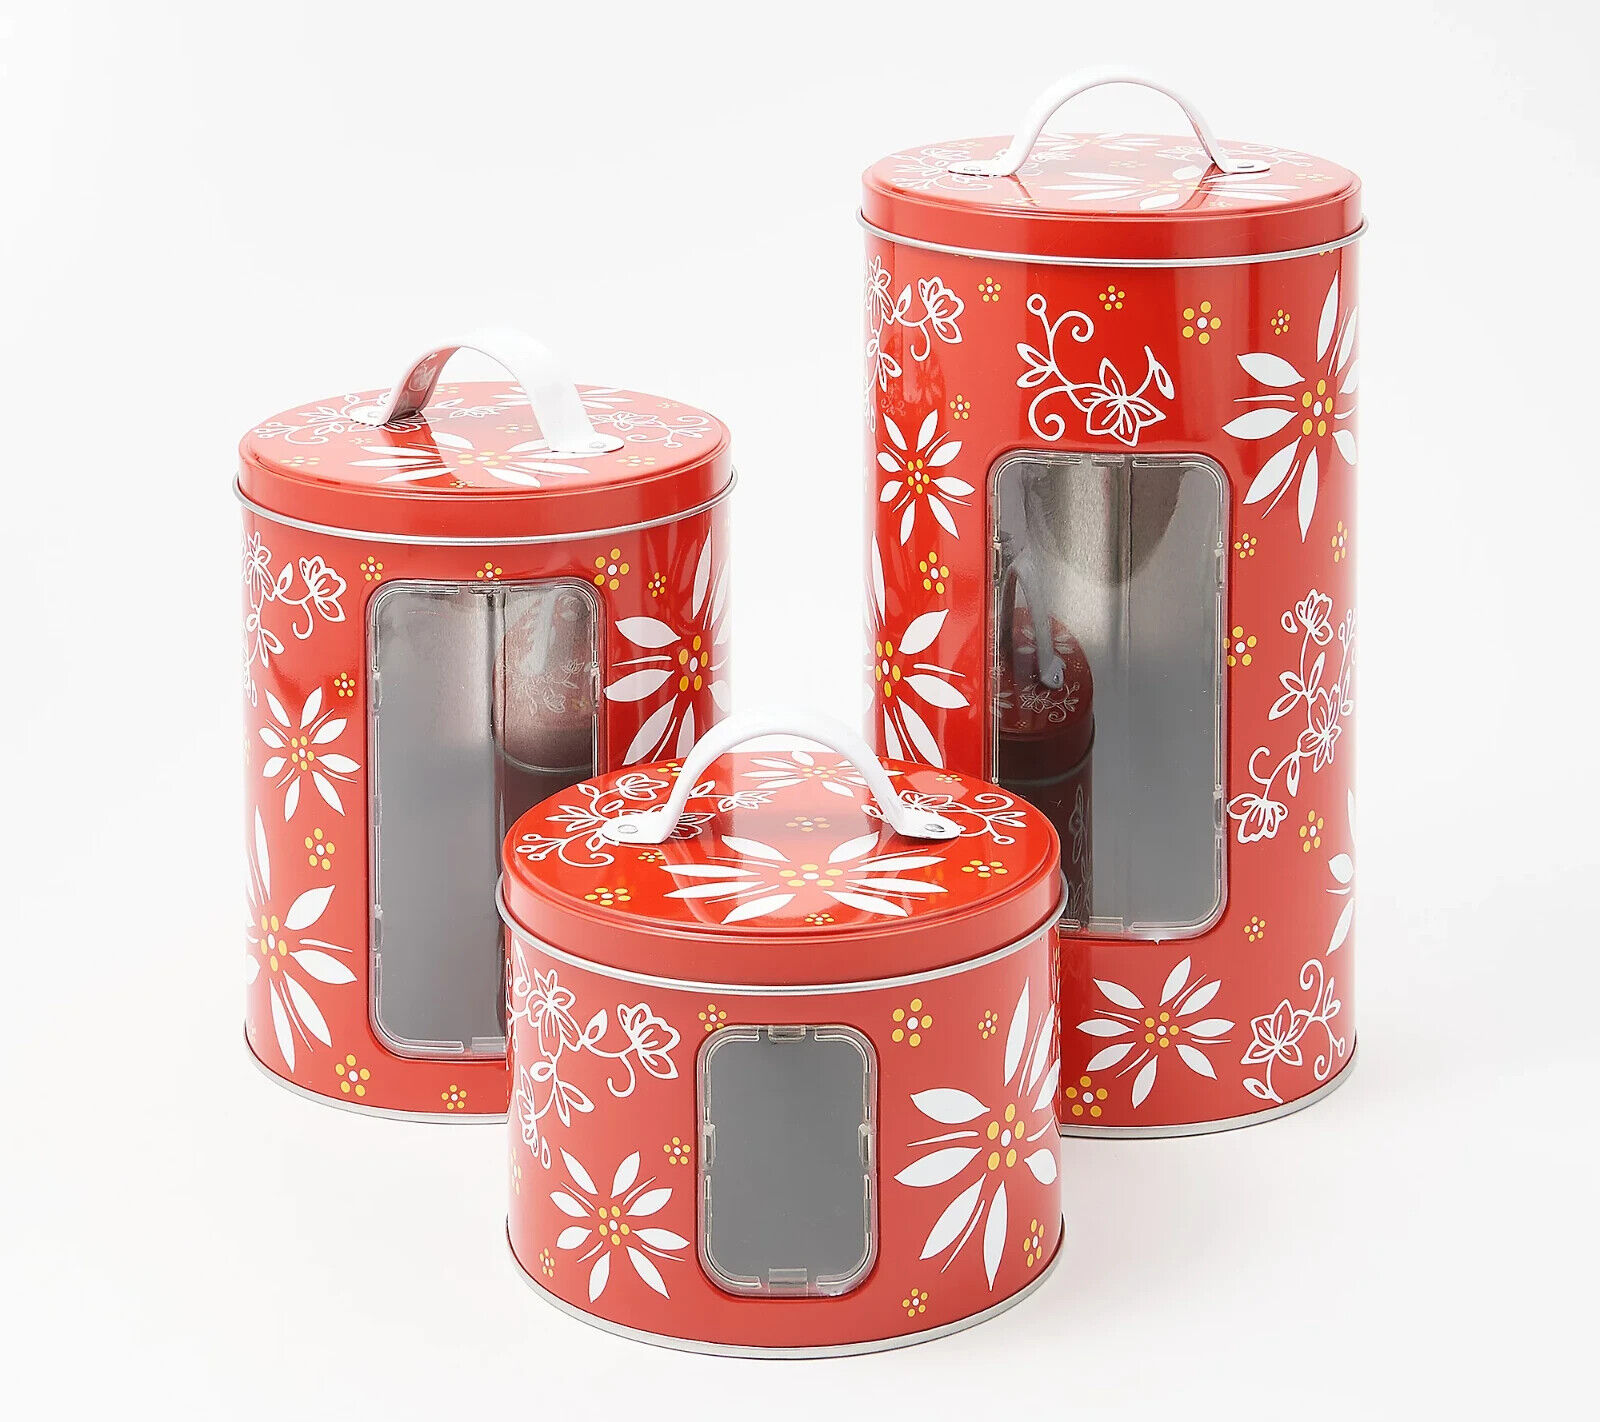 Temp-tations Classic Set of 3 Tin Canisters w Window - Red k55866 aa